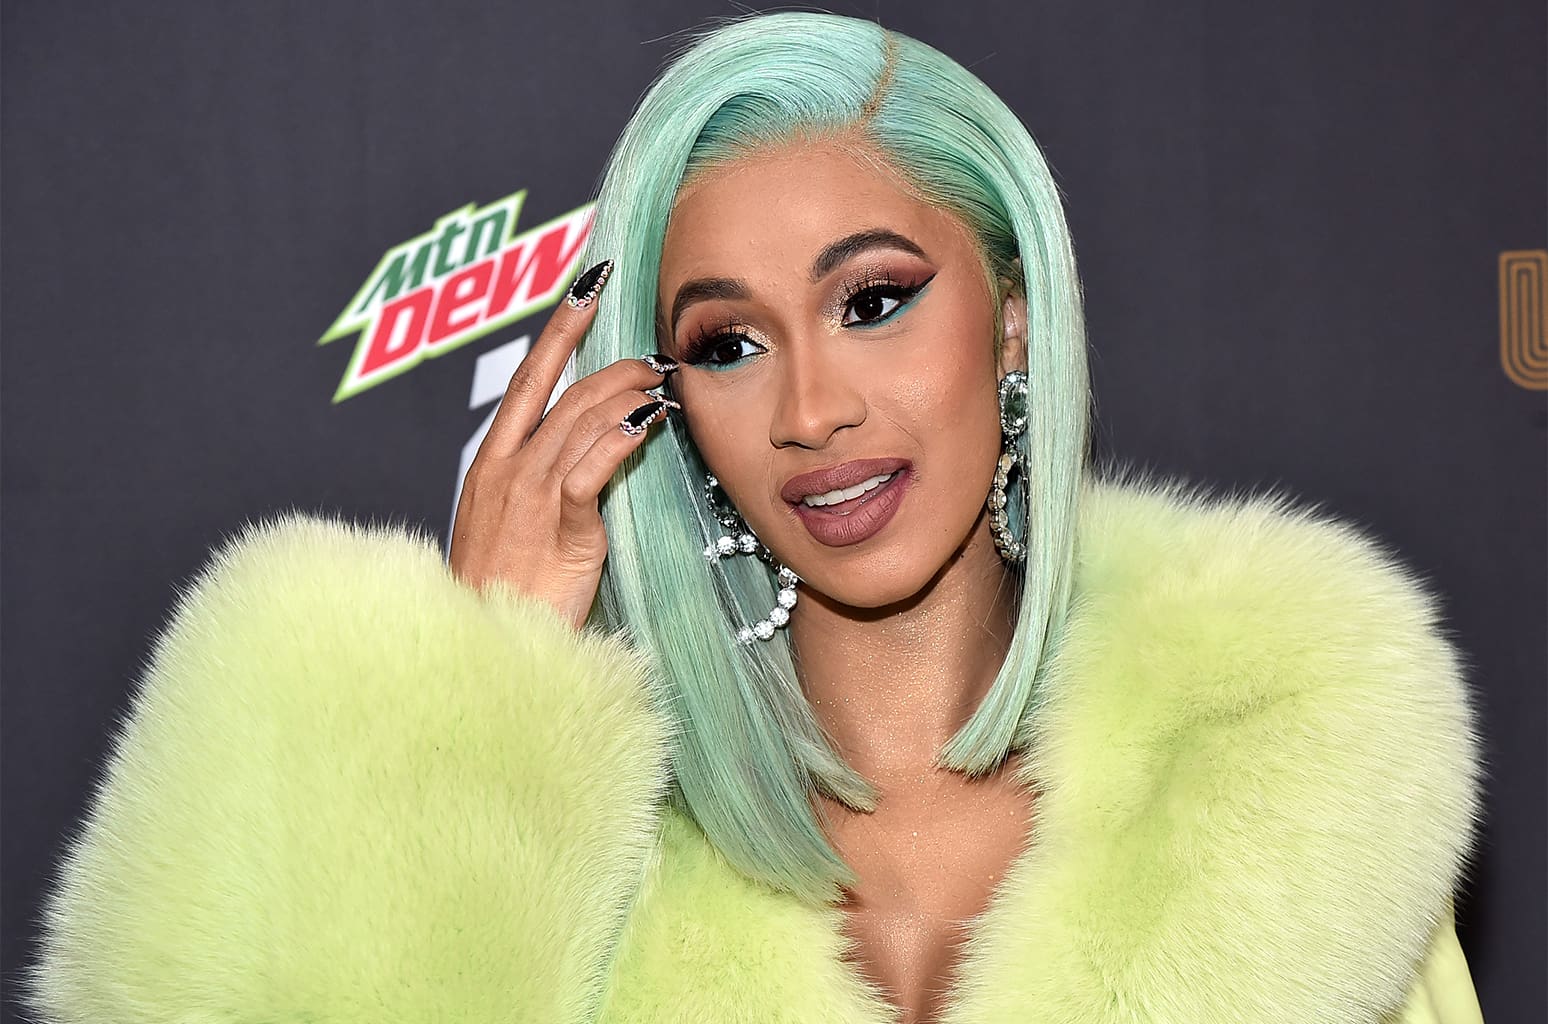 Cardi B Deletes Her Instagram Account After Winning Her First Grammy - What Happened?